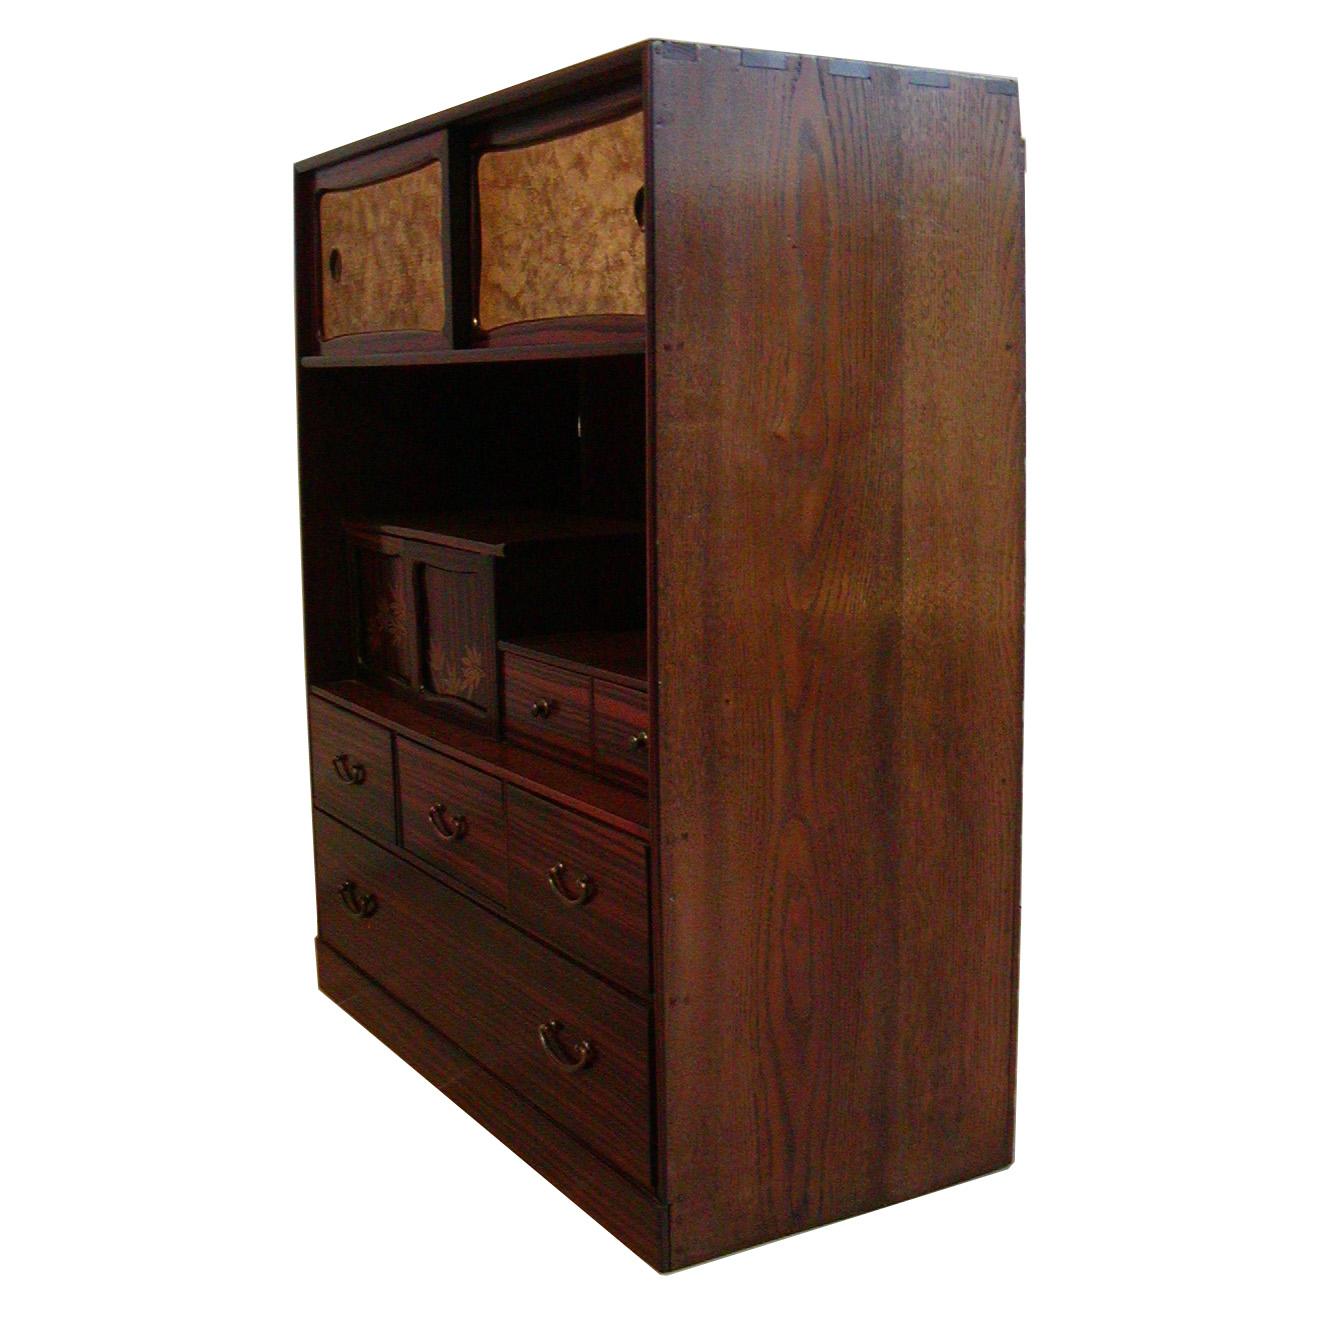 Japanese Cha-dansu (tea-chest) crafted of a chestnut casing with a rosewood veneer and Paulownia drawers, simple copper hardware with bale shaped handles, multiple small drawer and door configuration, with two sliding doors on top with inset panels